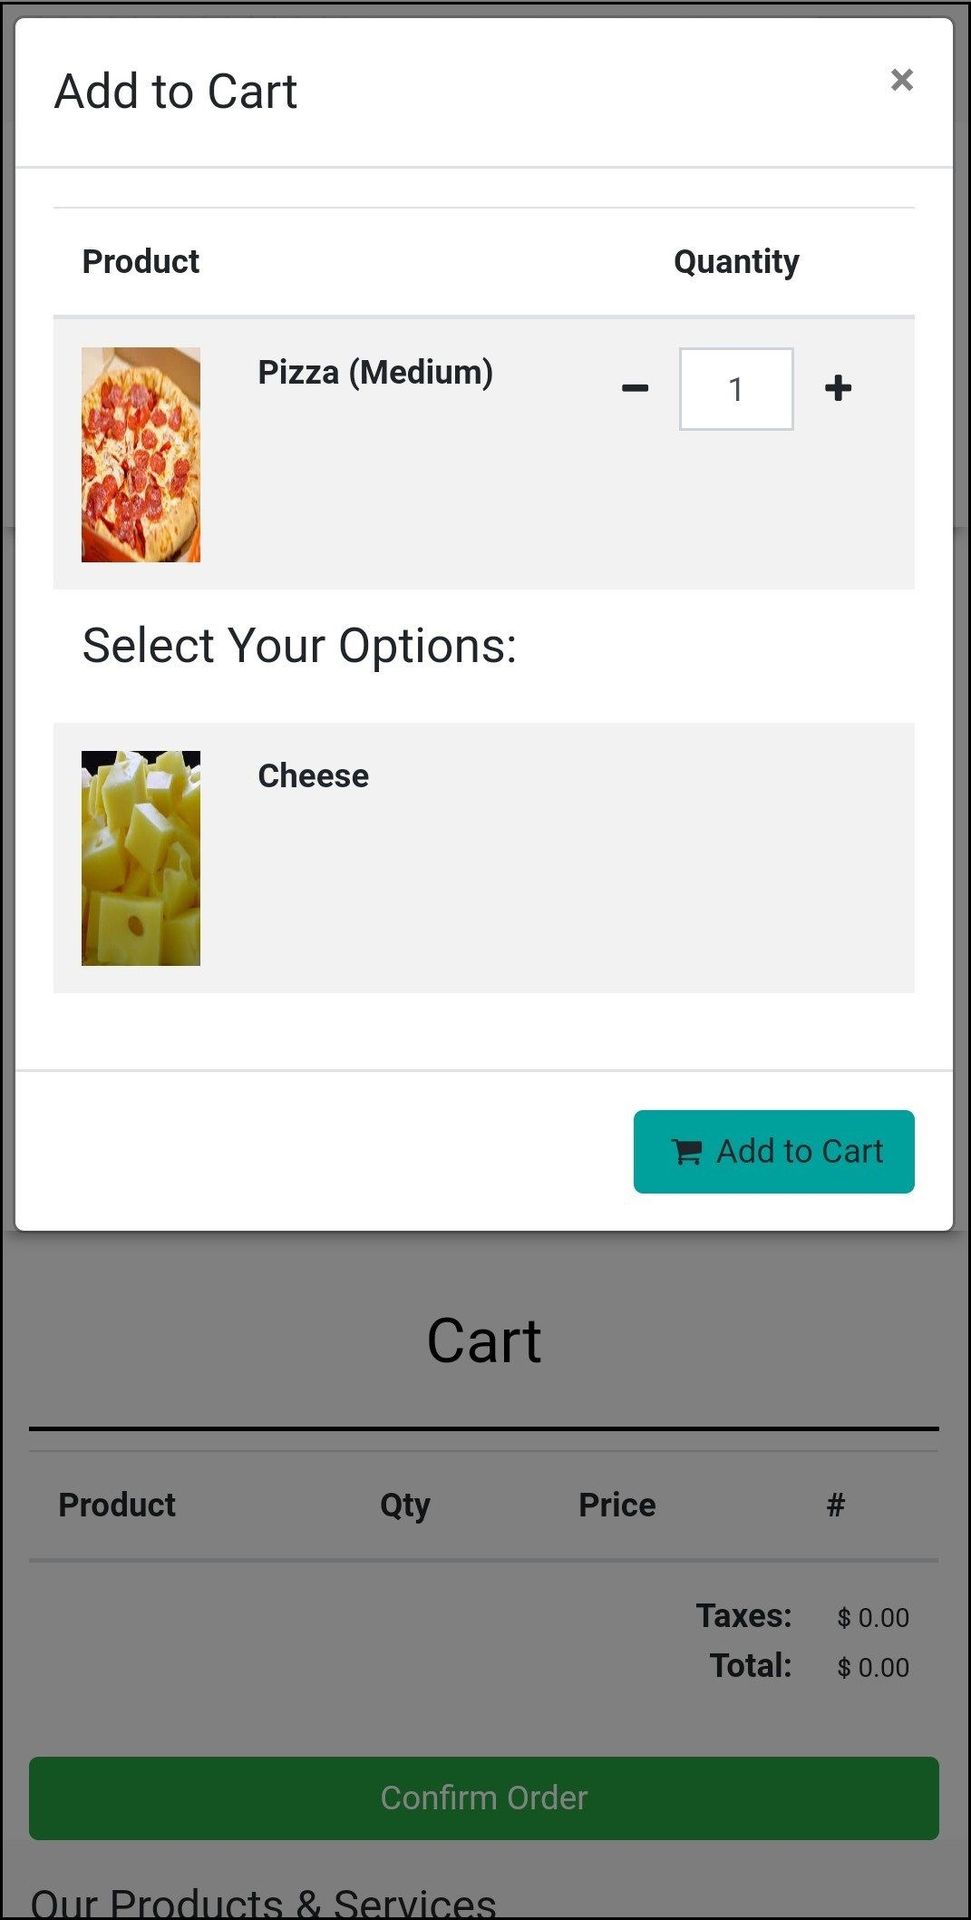 Example: Let us Add Pizza to the Order and select Quantity